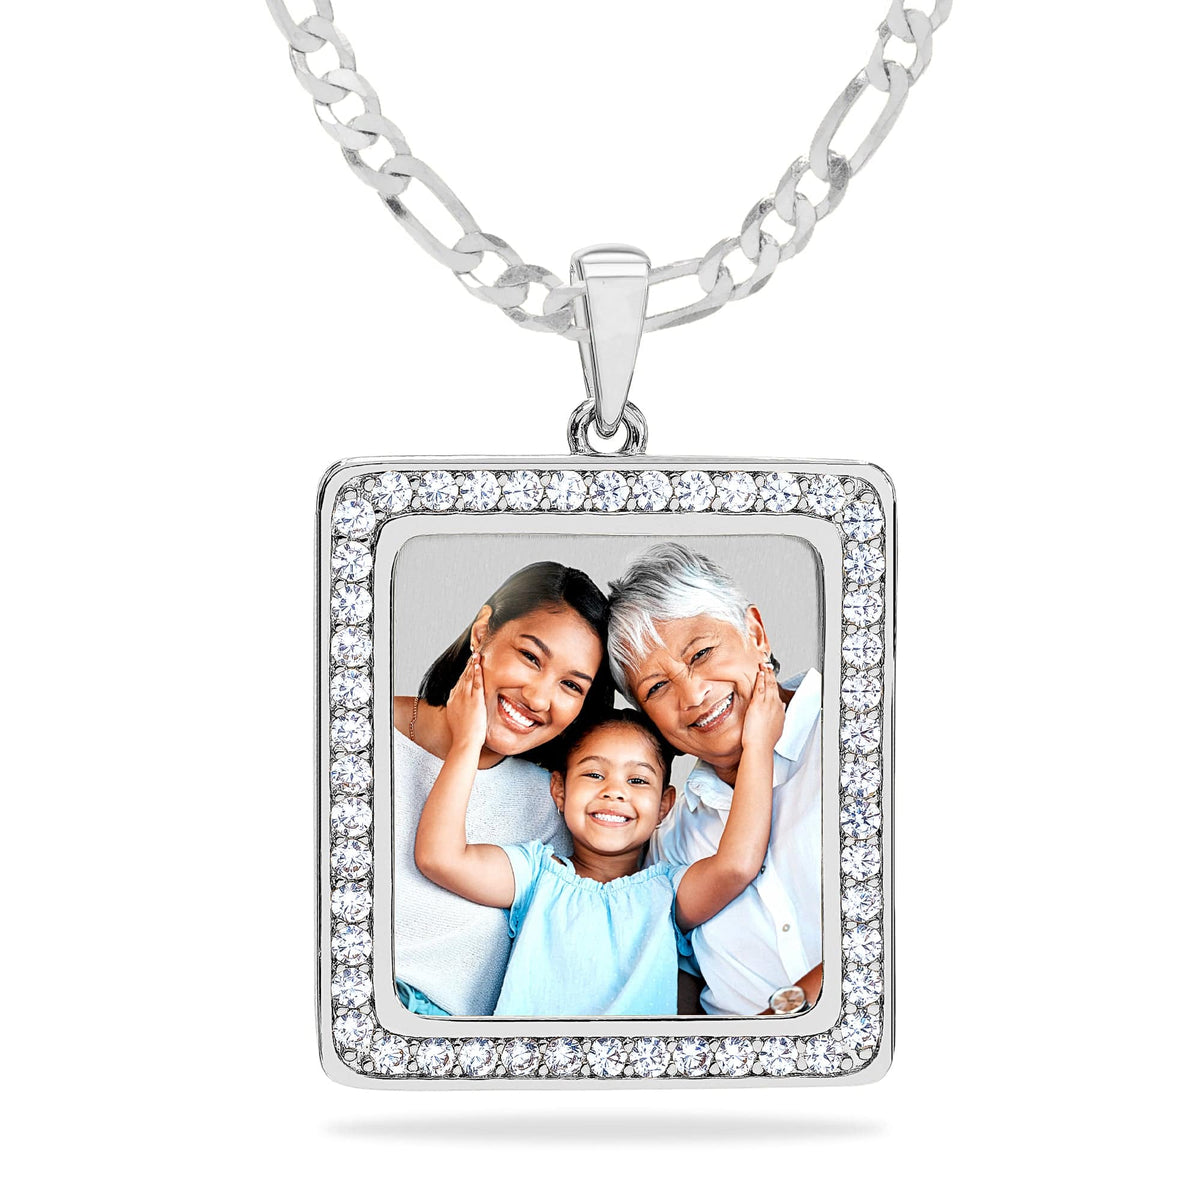 Silver Plated / Figaro Chain Square Photo Pendant with Stones